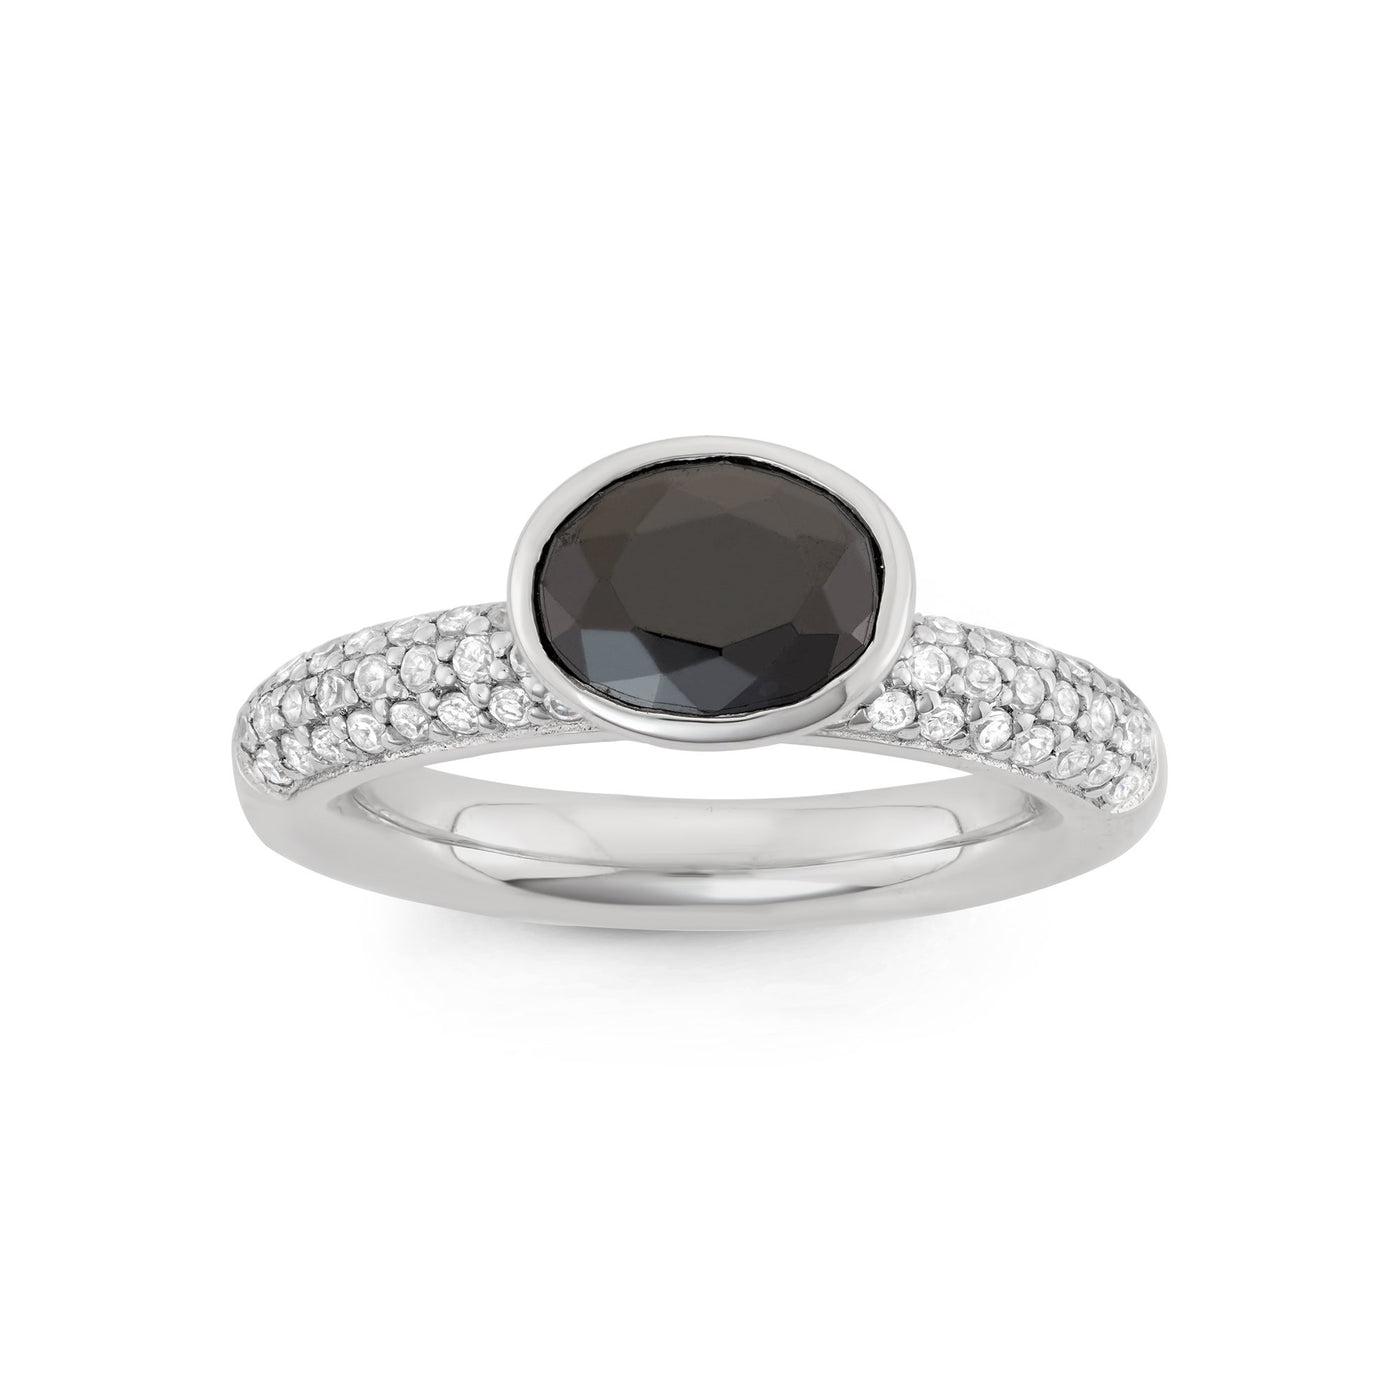 Sterling Silver Spinning Ring With Pave White CZ and Black CZ Center Stone